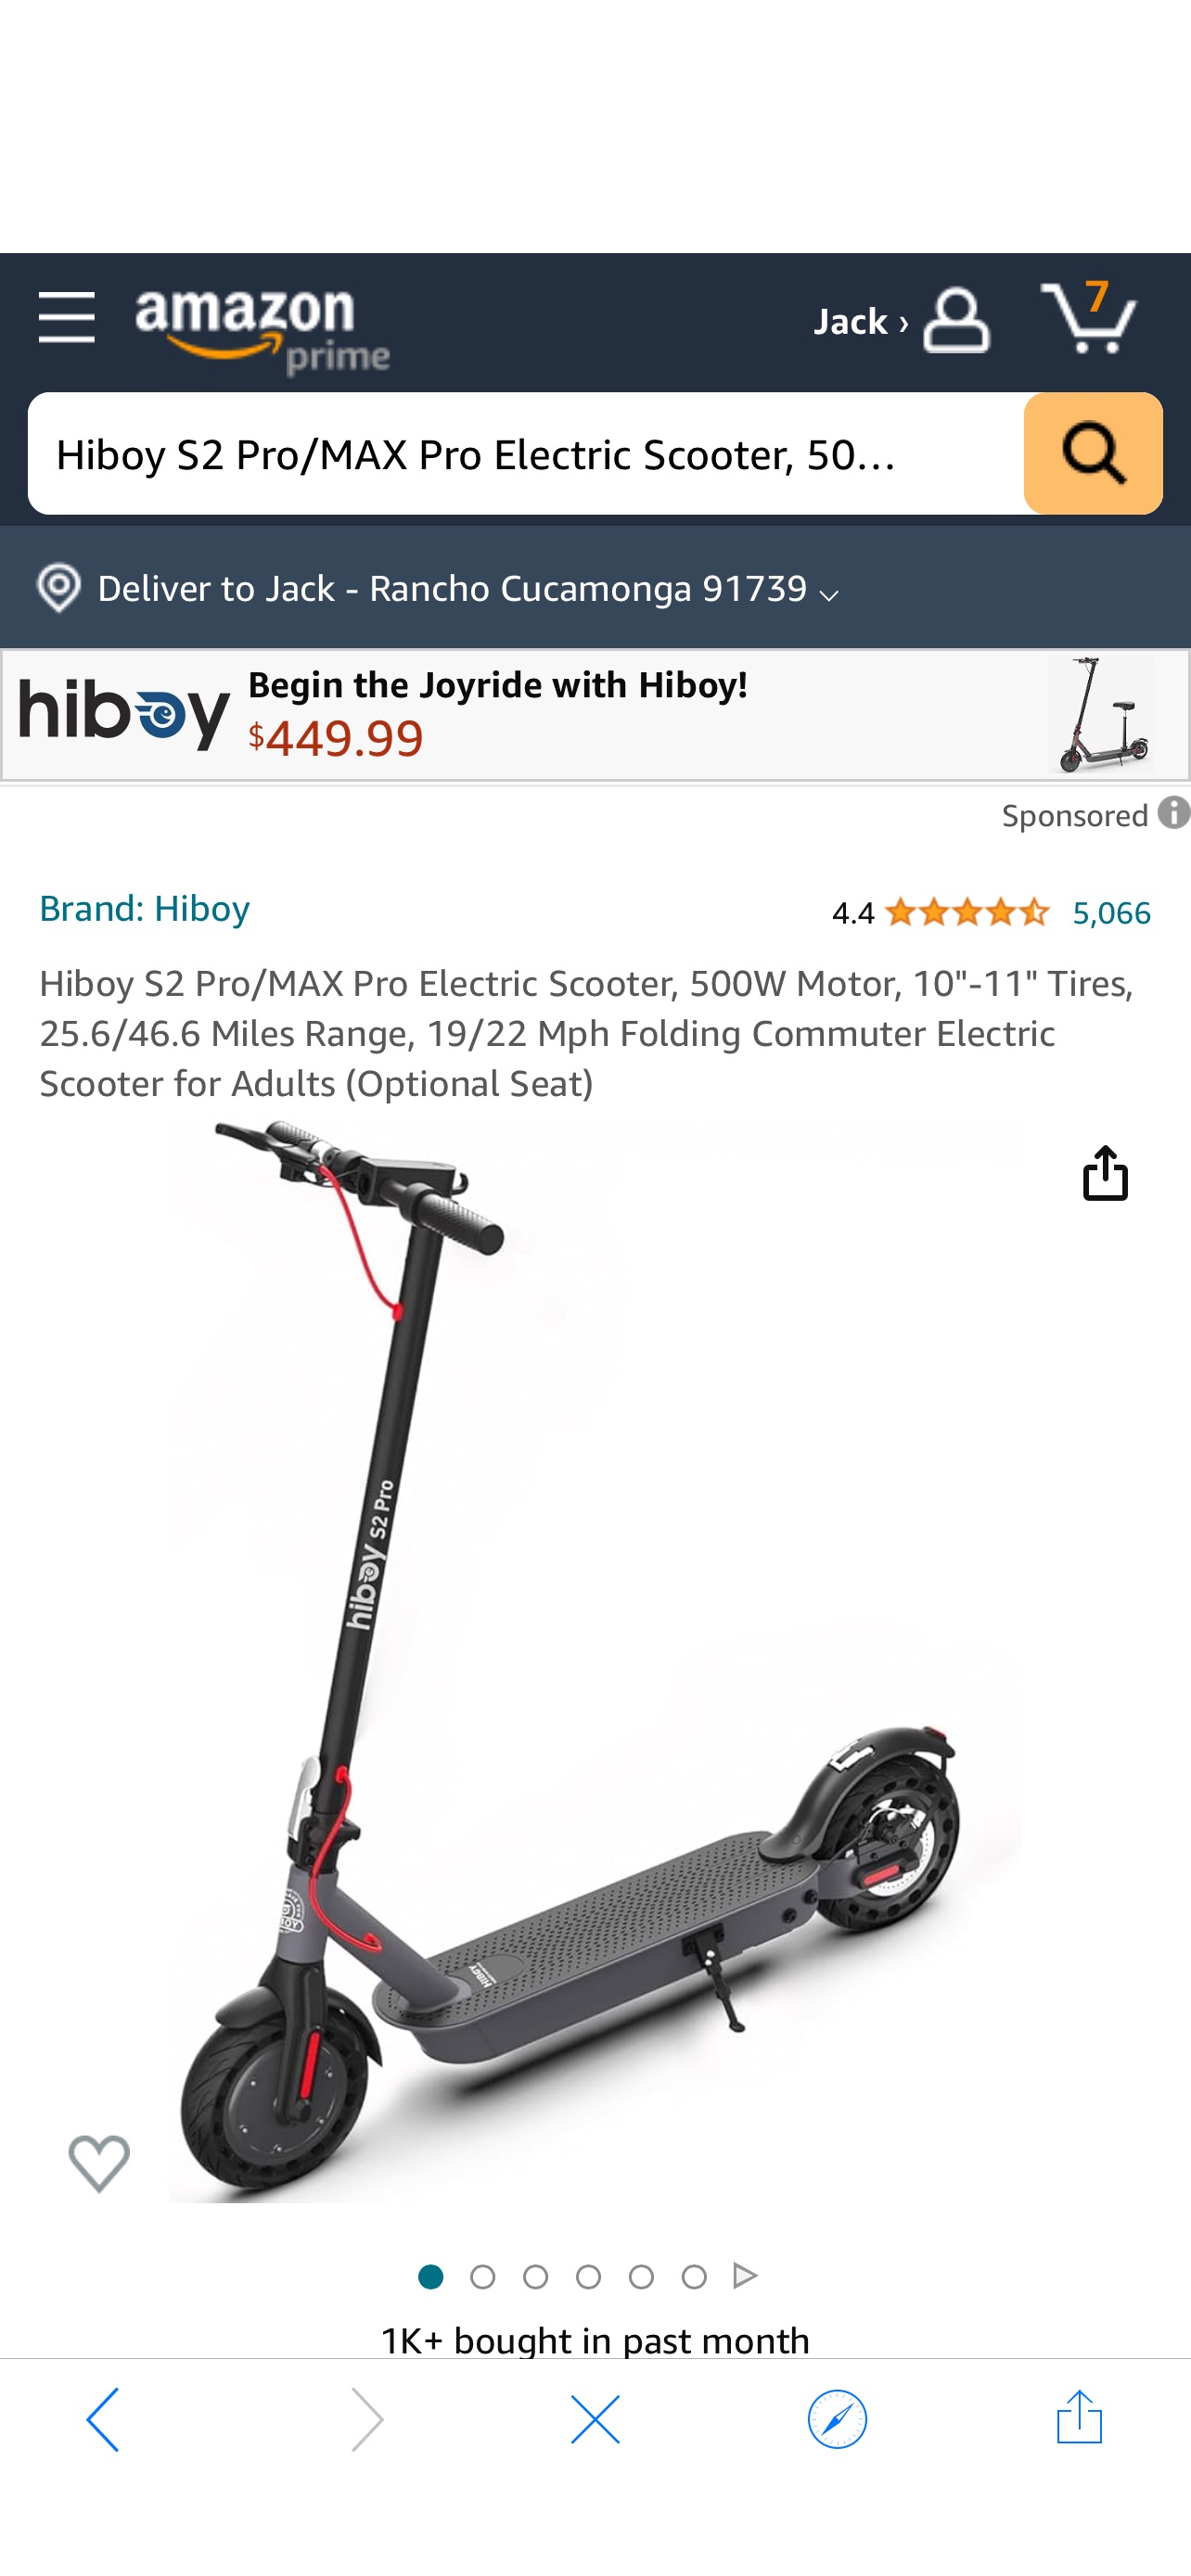 Amazon.com : Hiboy S2 Pro Electric Scooter, 500W Motor, 10" Solid Tires, 25 Miles Range, 19 Mph Folding Commuter Electric Scooter for Adults : Sports & Outdoors